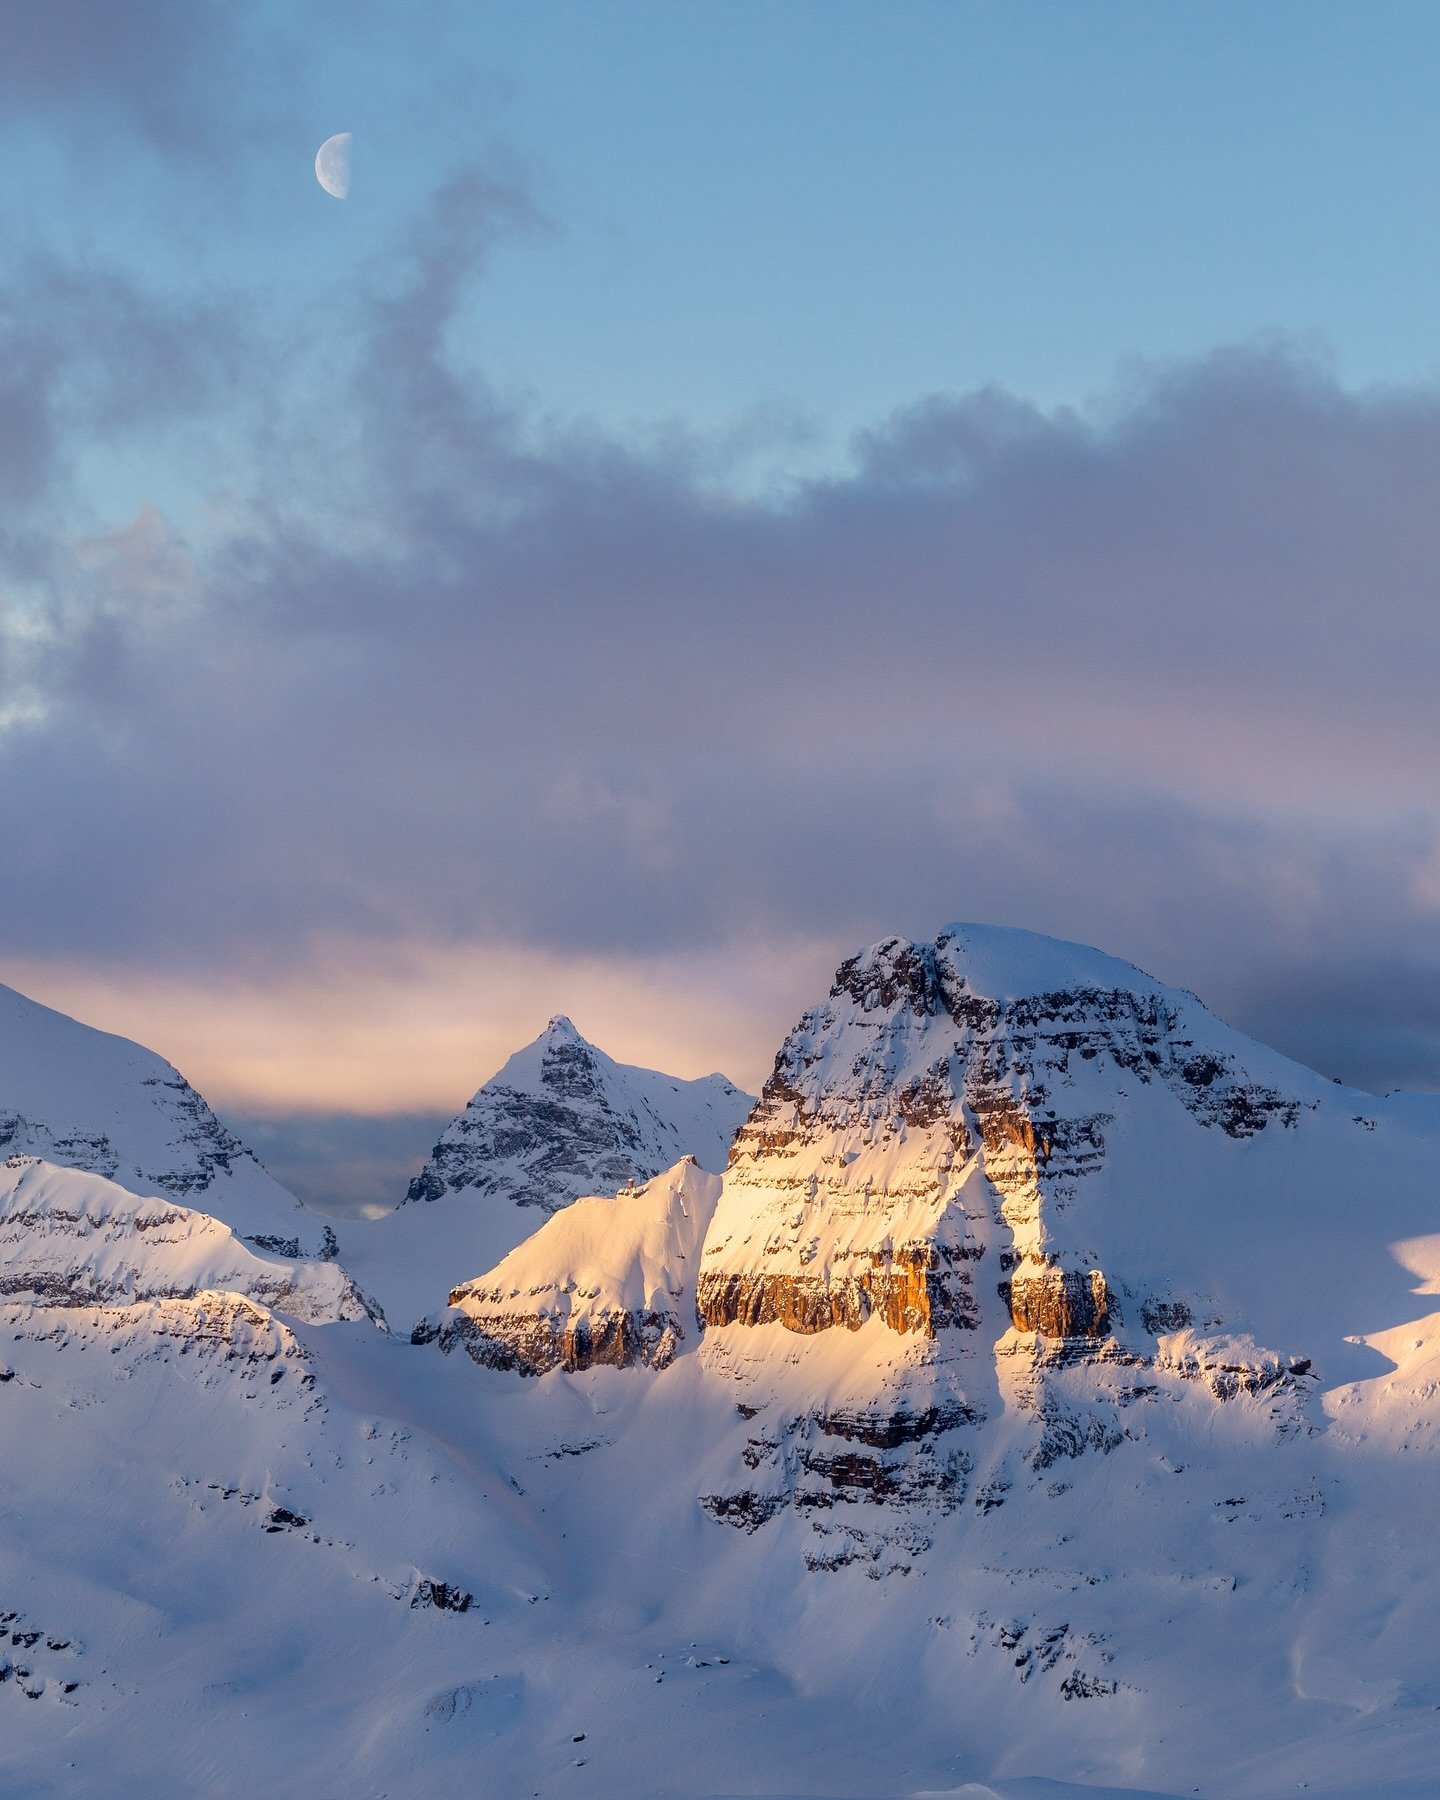 Day 2057: I was kind of sad to miss the opportunity to capture any good sunrises/sunsets on my recent ski tour in the Canadian Rockies. Despite clear conditions for much of the time, the evenings always seemed to cloud up at the last moment. Skies wo